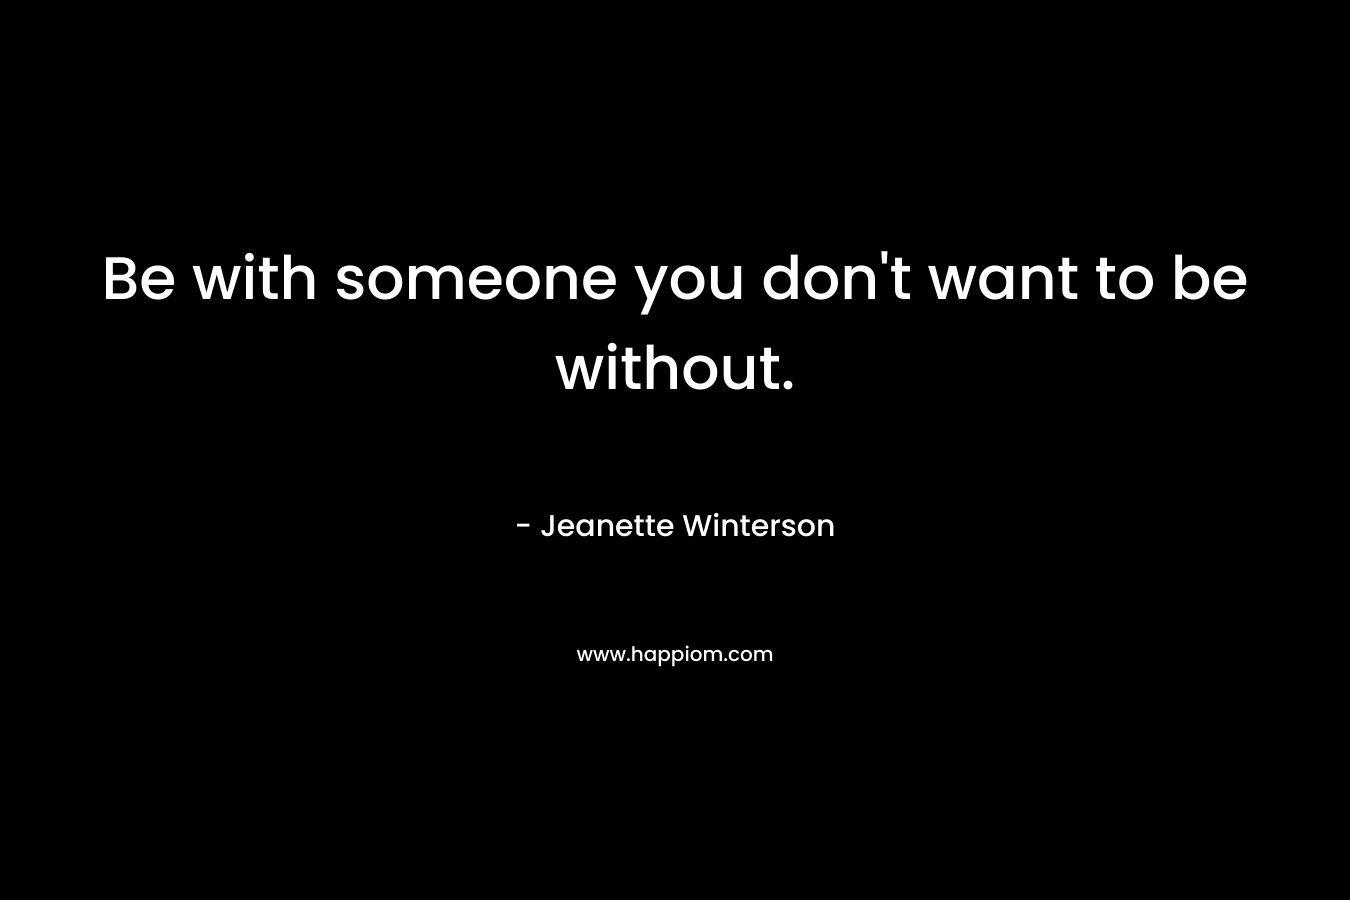 Be with someone you don't want to be without.